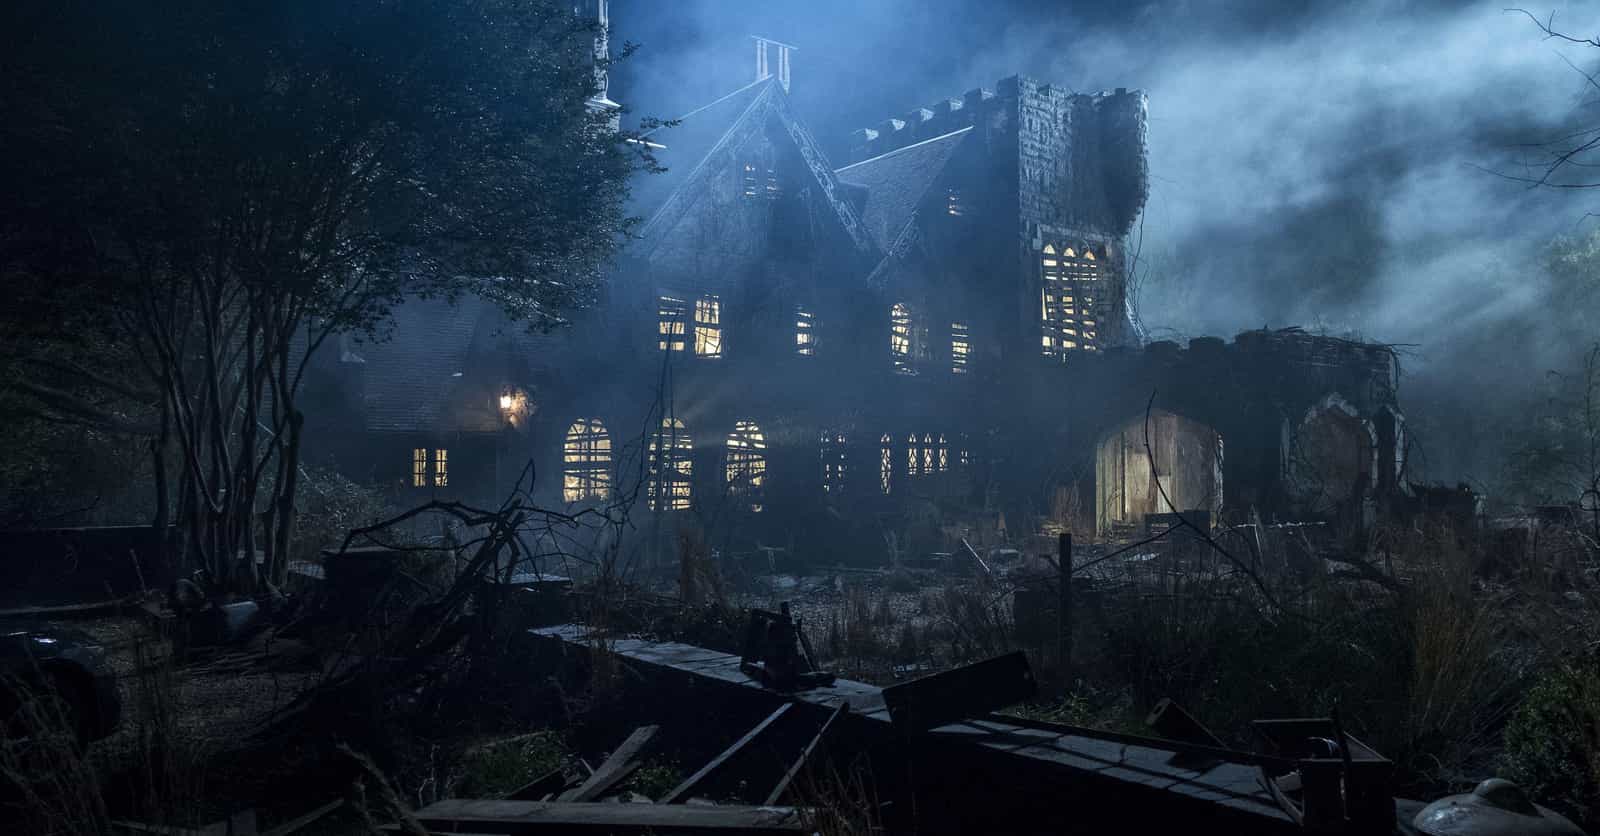 Behind-The-Scenes Stories From 'The Haunting Of Hill House'